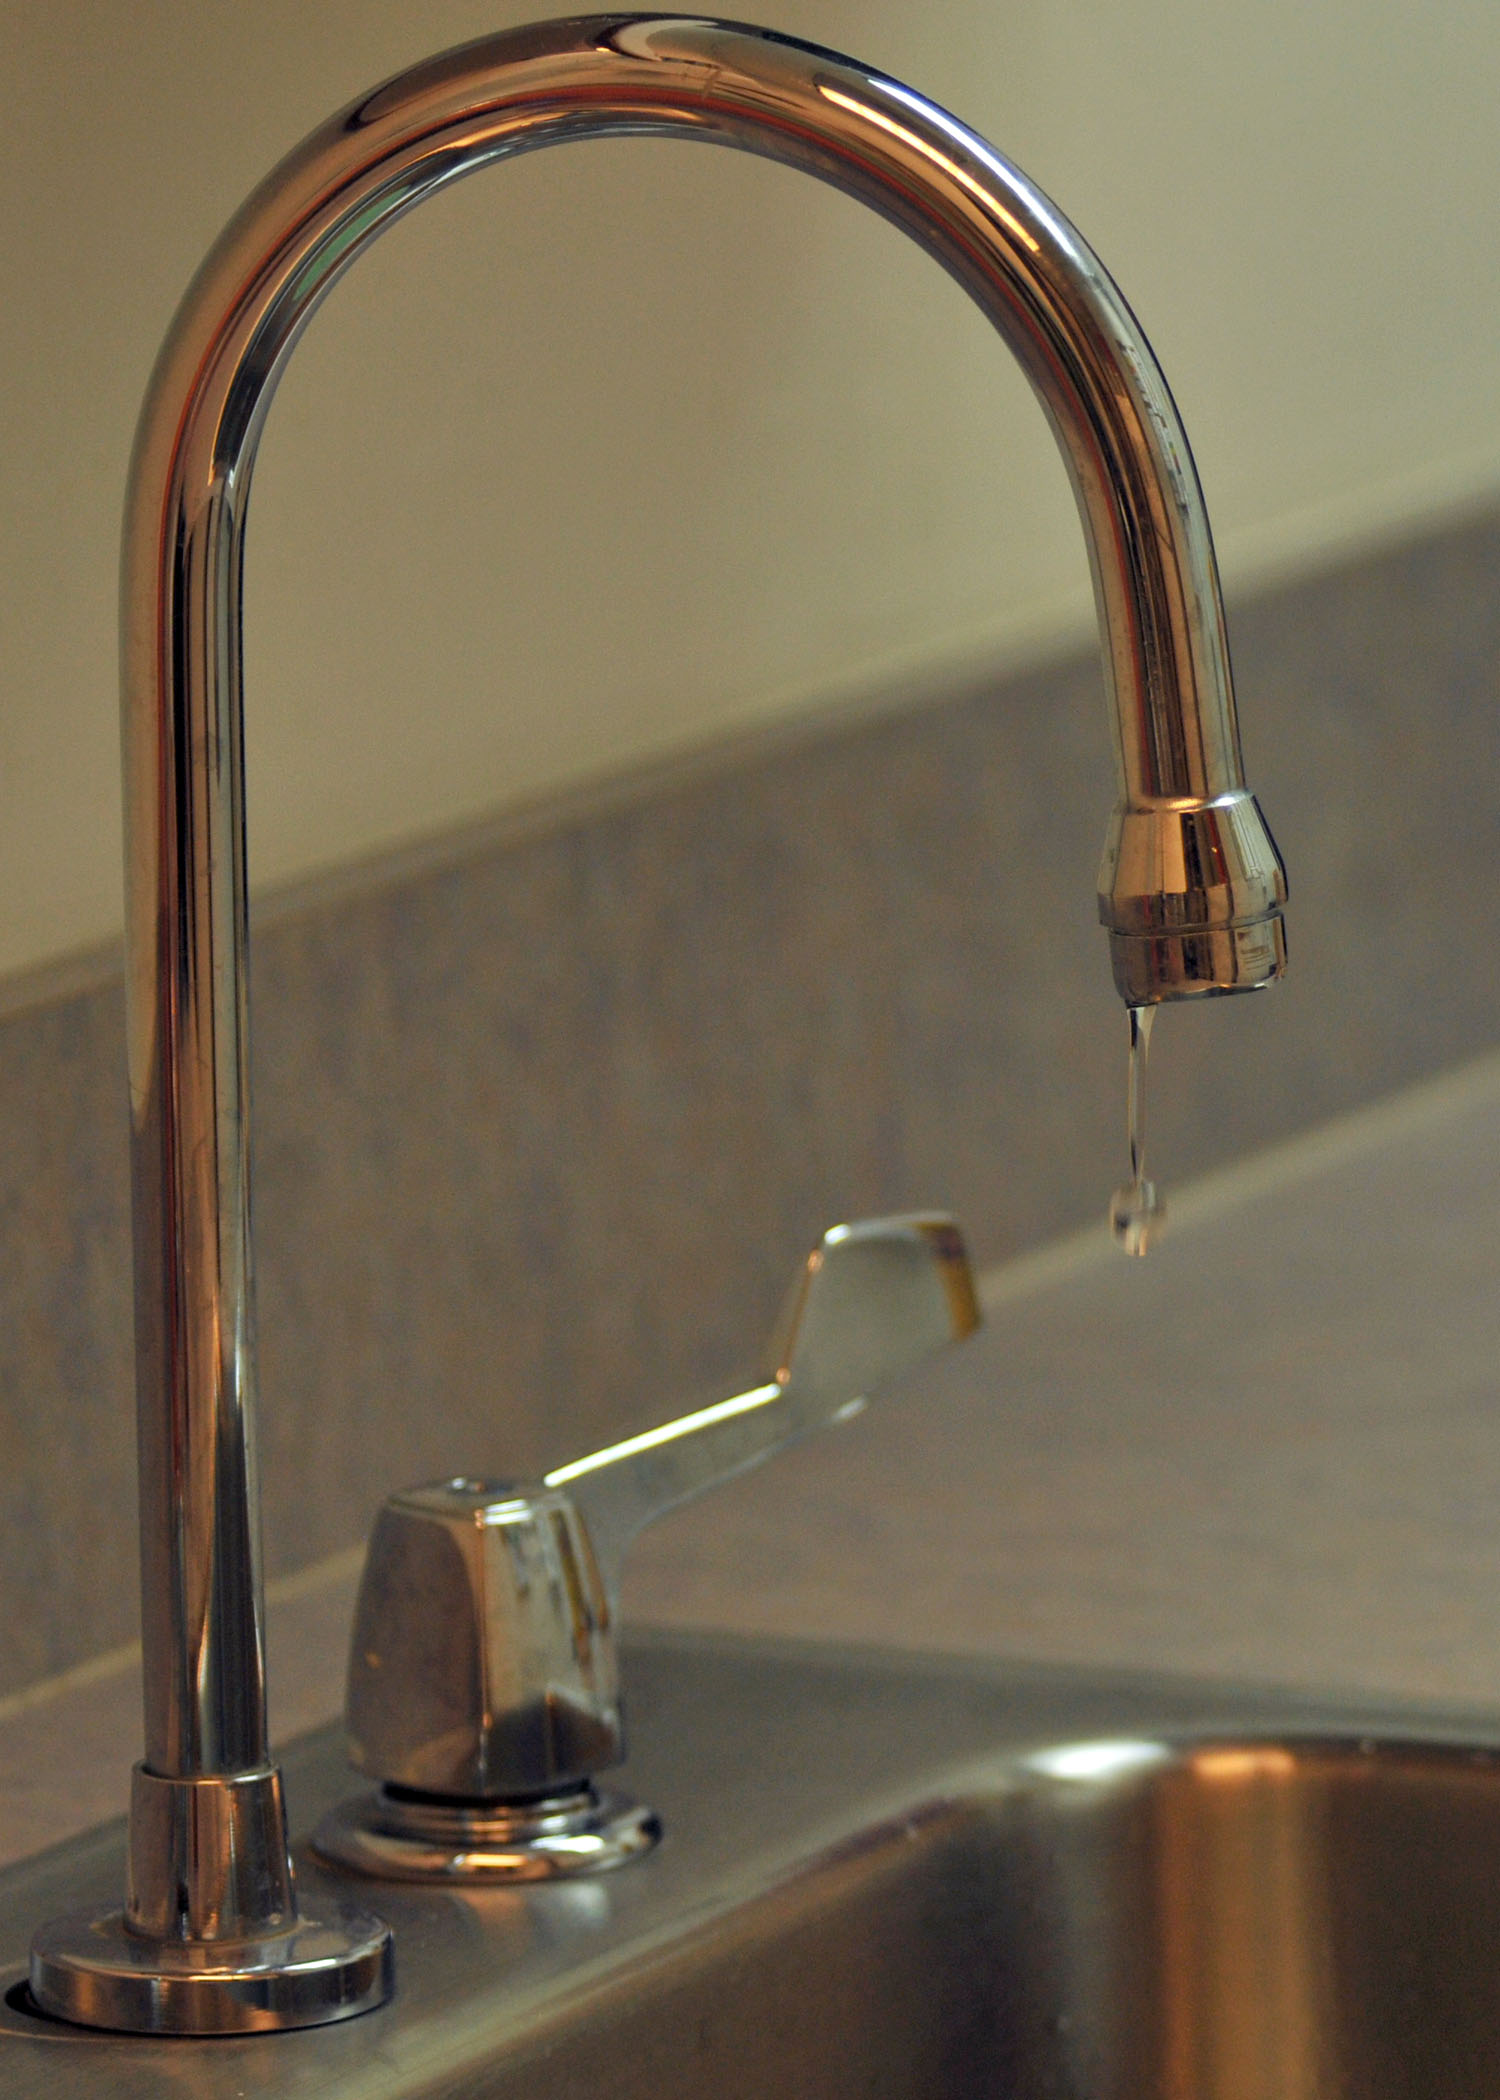 How to Prevent Water Damage from Appliances and Plumbing Fixtures